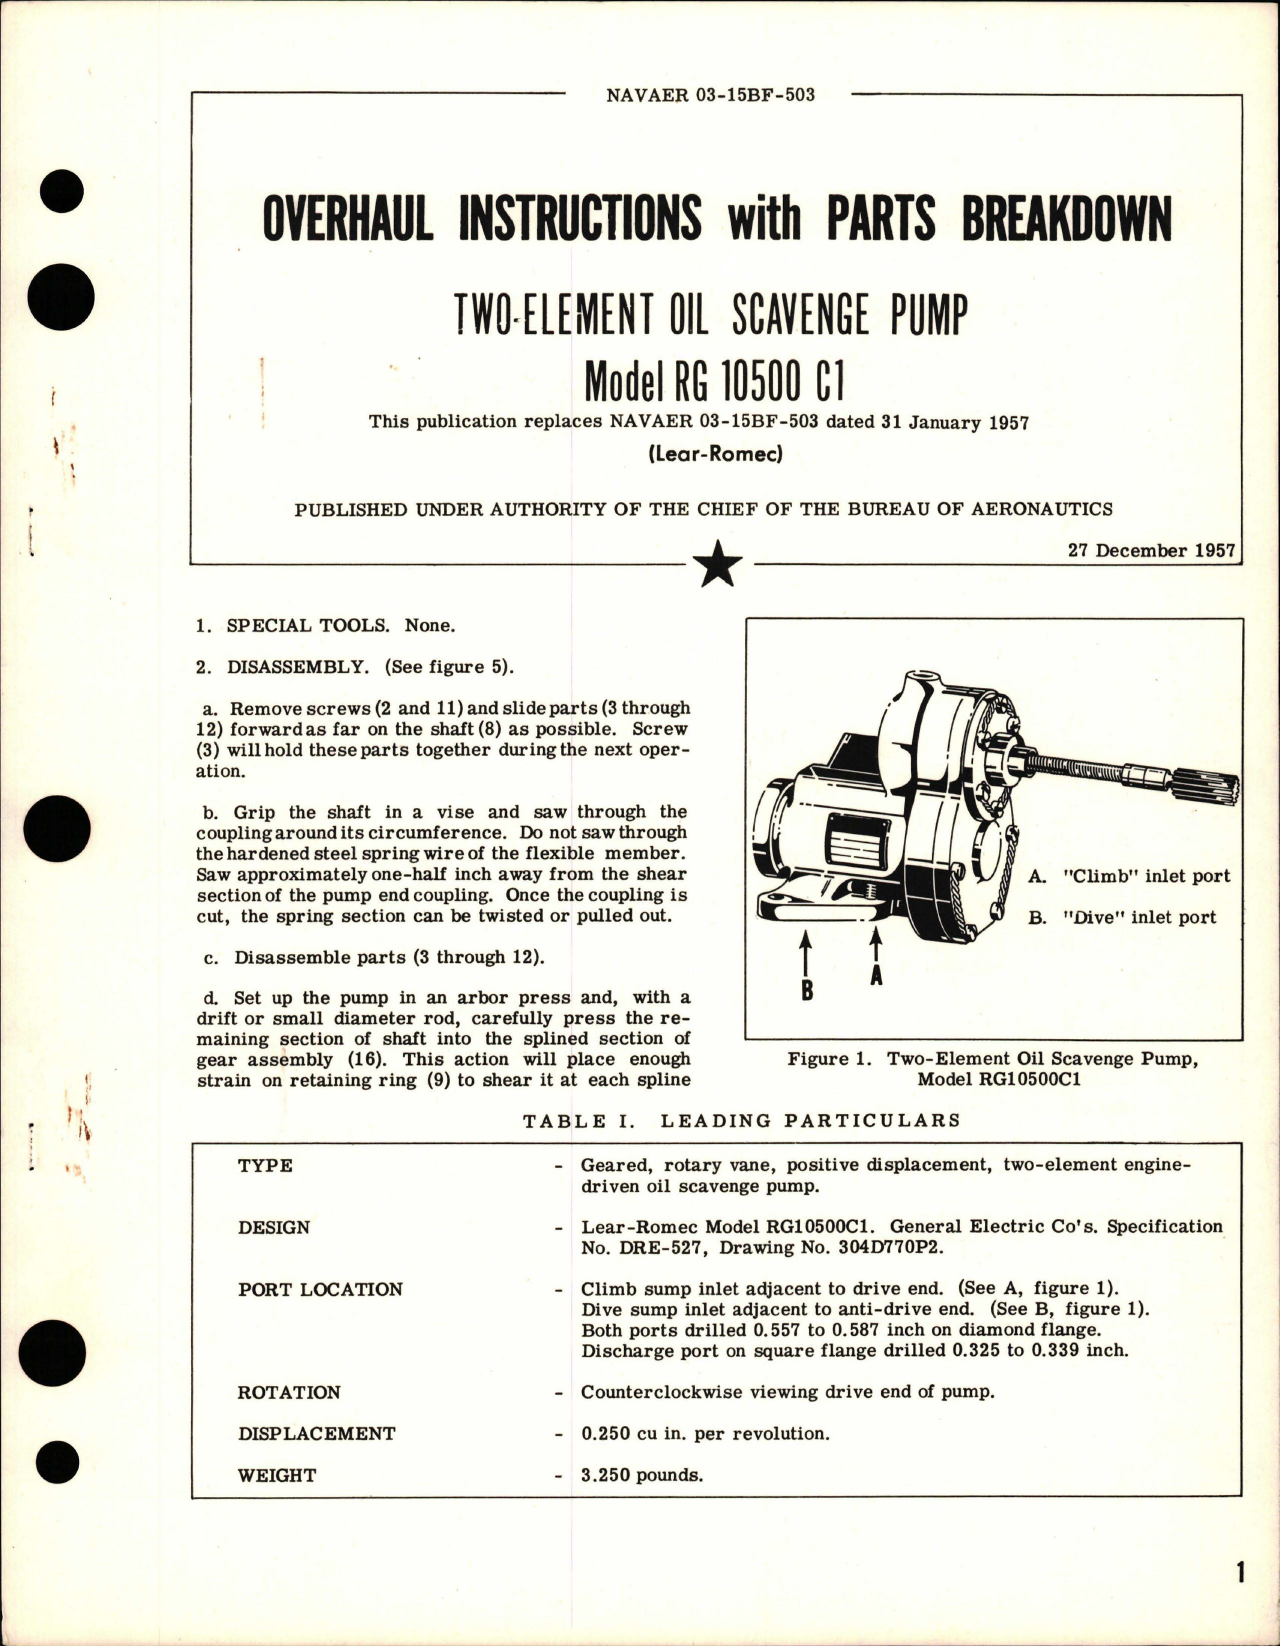 Sample page 1 from AirCorps Library document: Overhaul Instructions with Parts for Two-Element Oil Scavenge Pump - Model RG 10500 C1